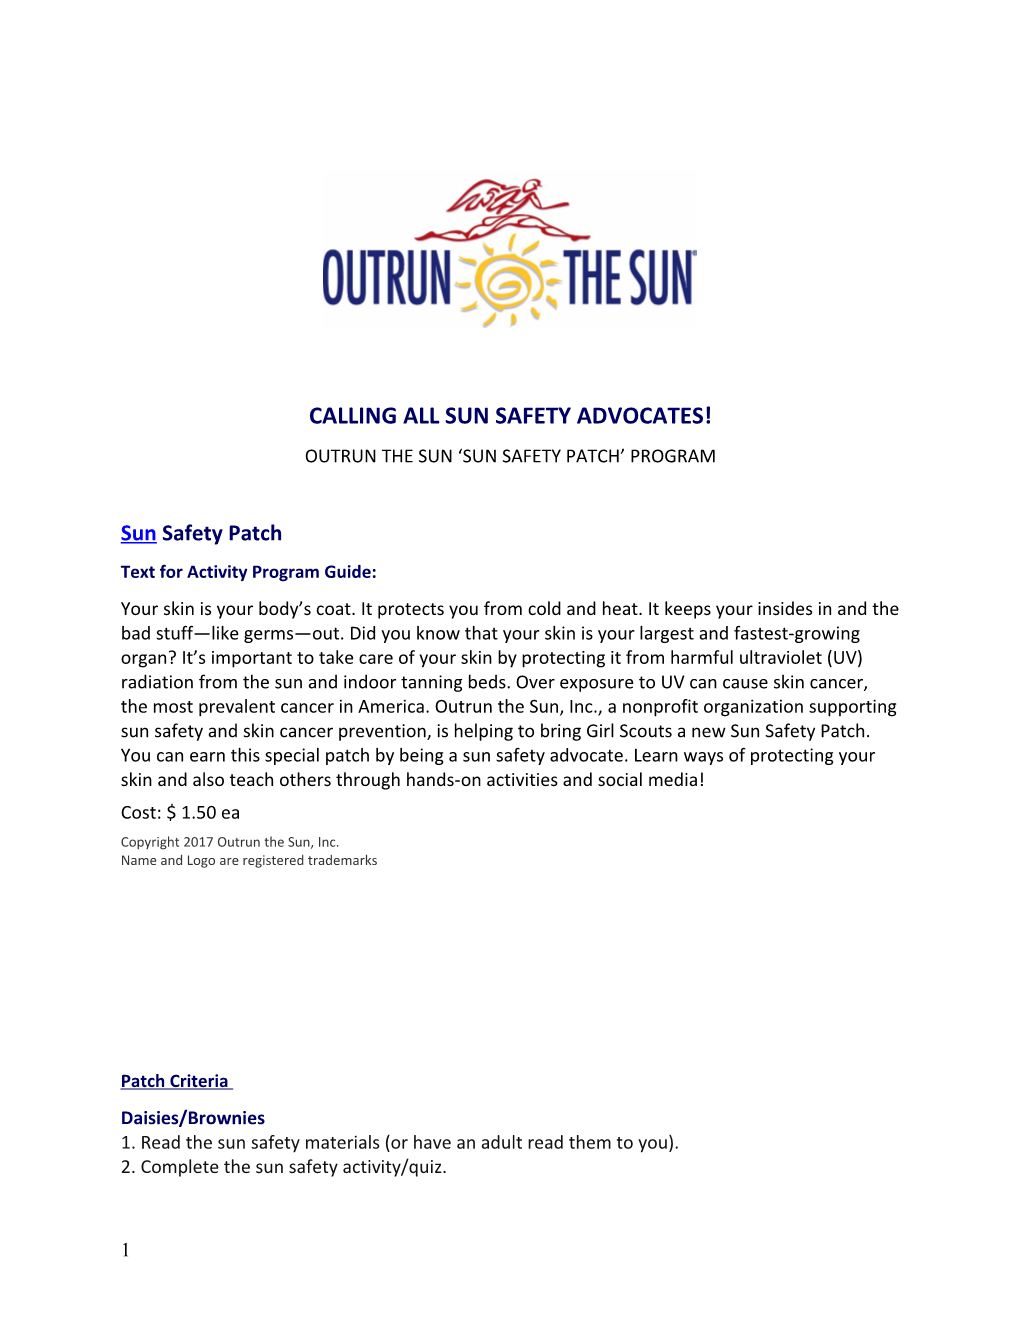 Calling All Sun Safety Advocates!